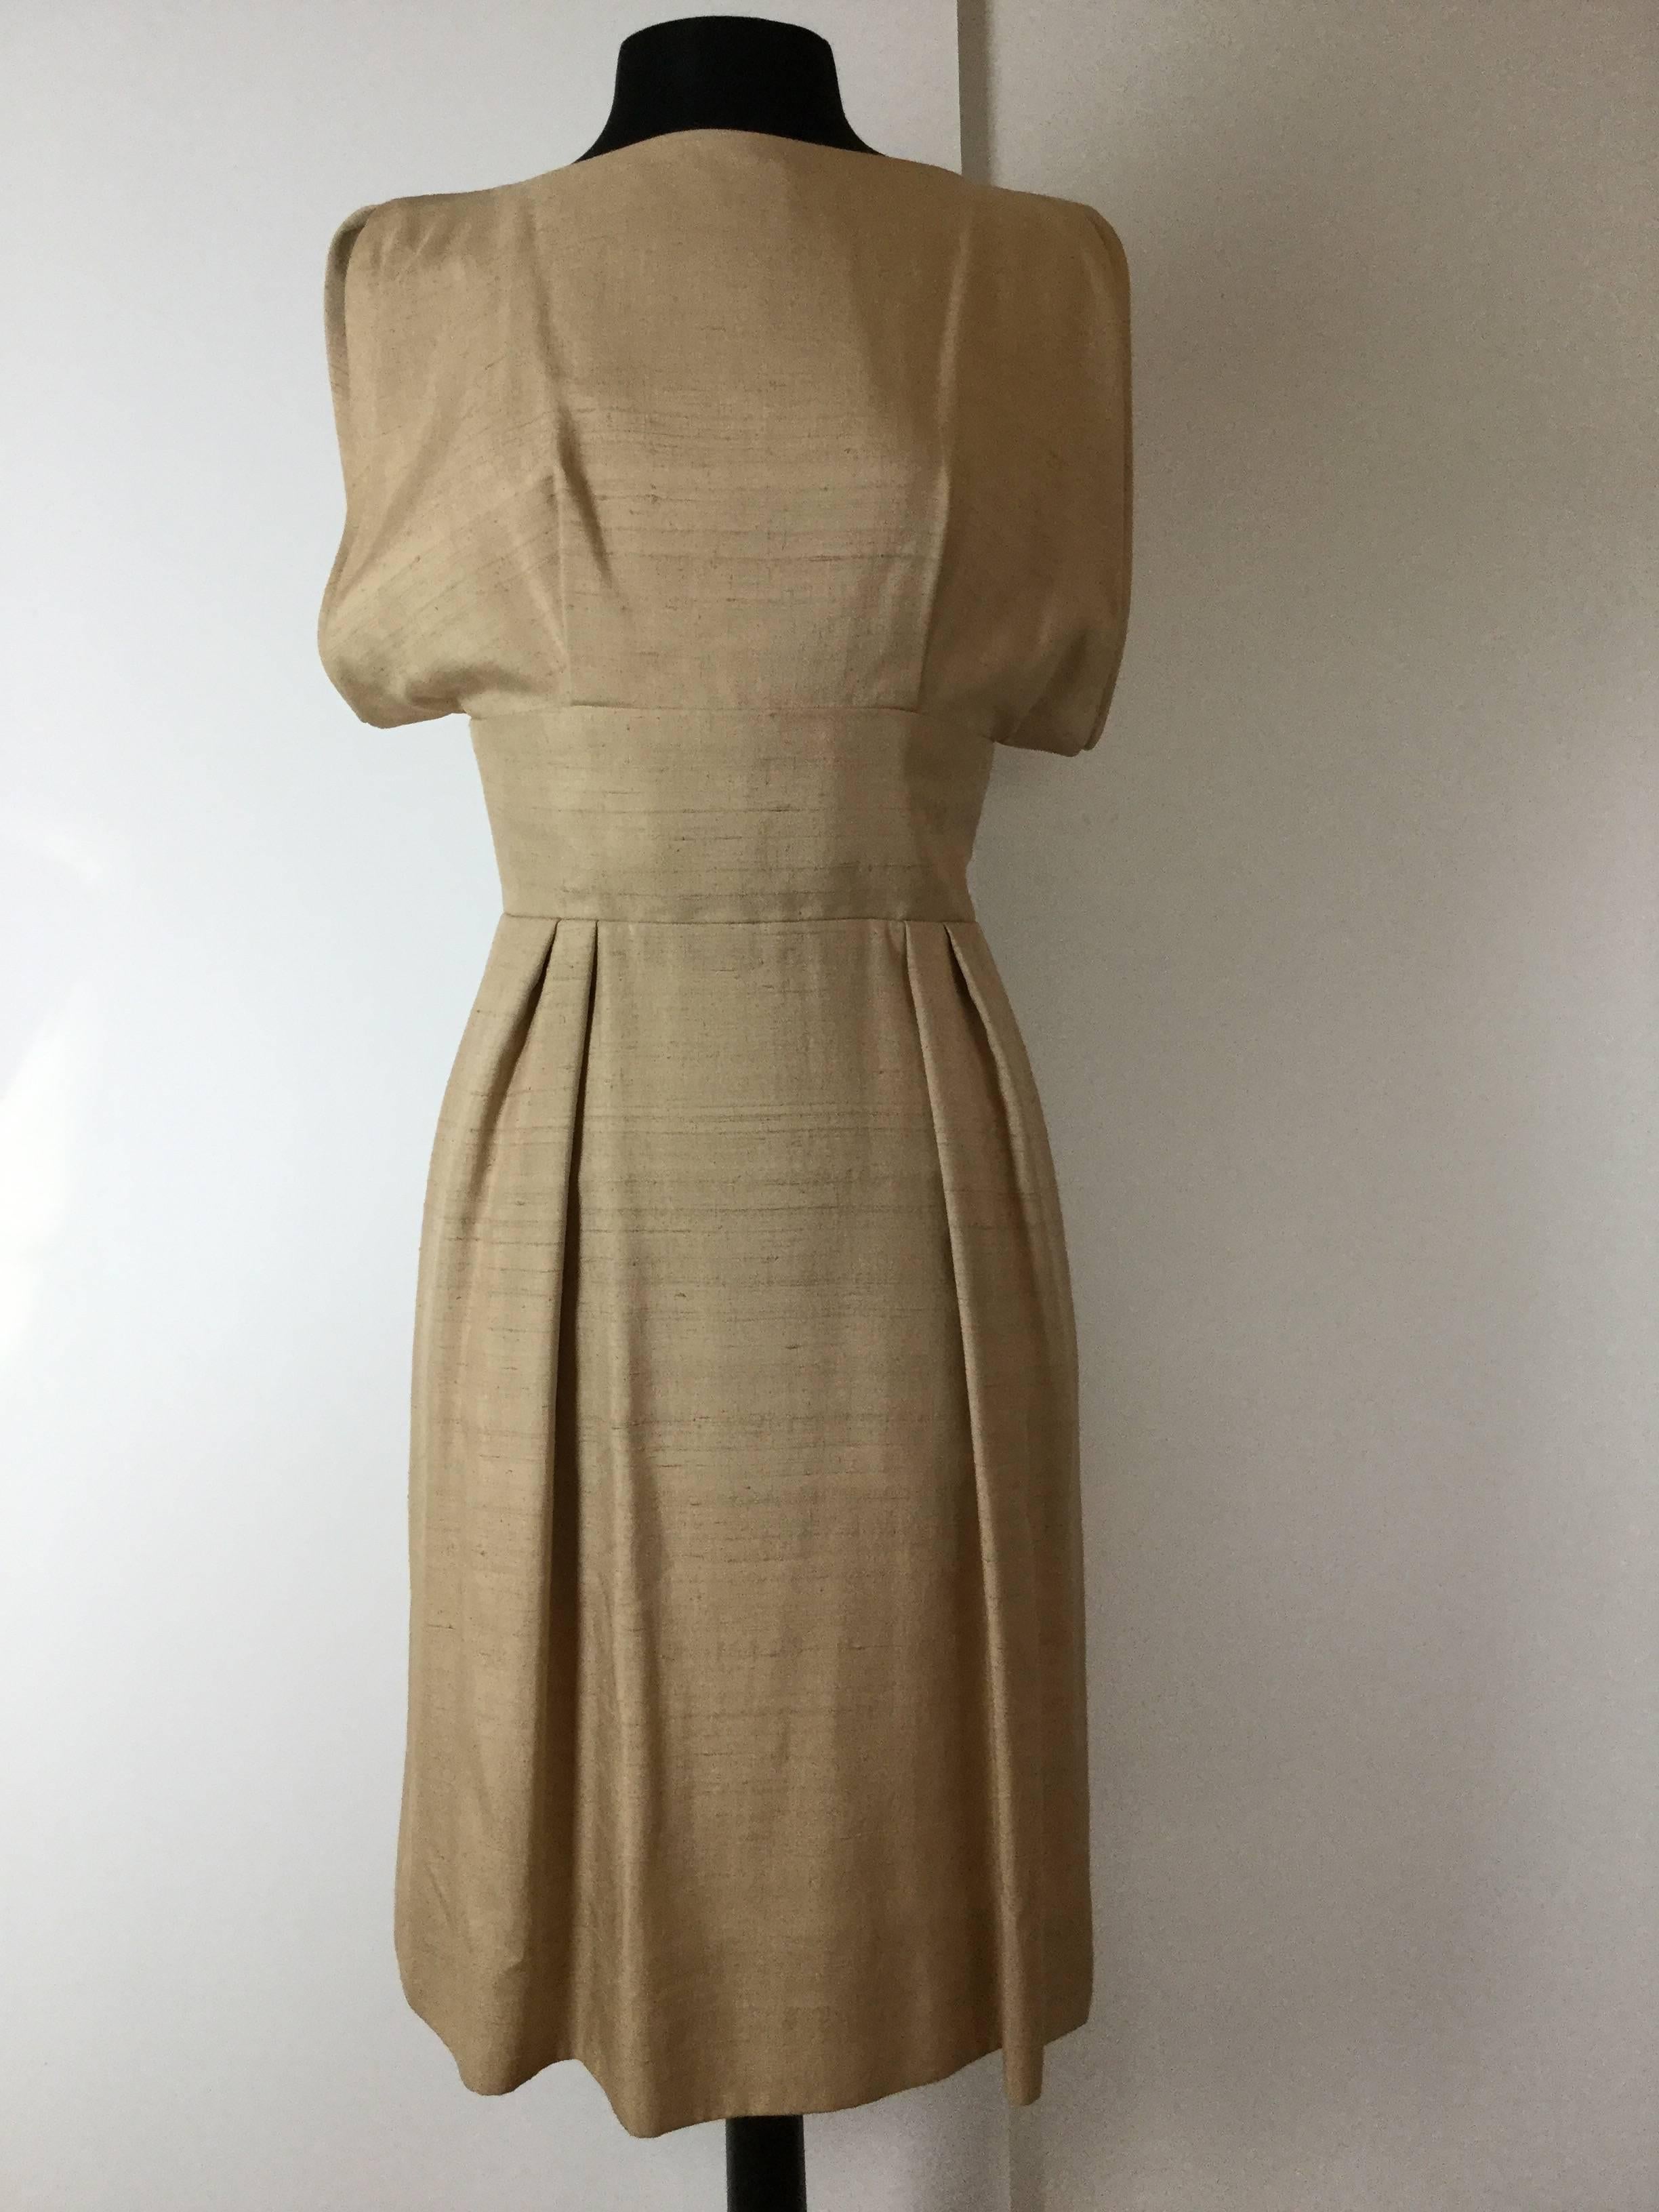 Chic raw silk beige dress probably designed by Geoffrey Beene in the early in 1960's for Teal Traina. Cool architectural cut. So simple and elegant. Fastens down the back with large black buttons.  Hidden slash pockets on both sides. 
Fully lined